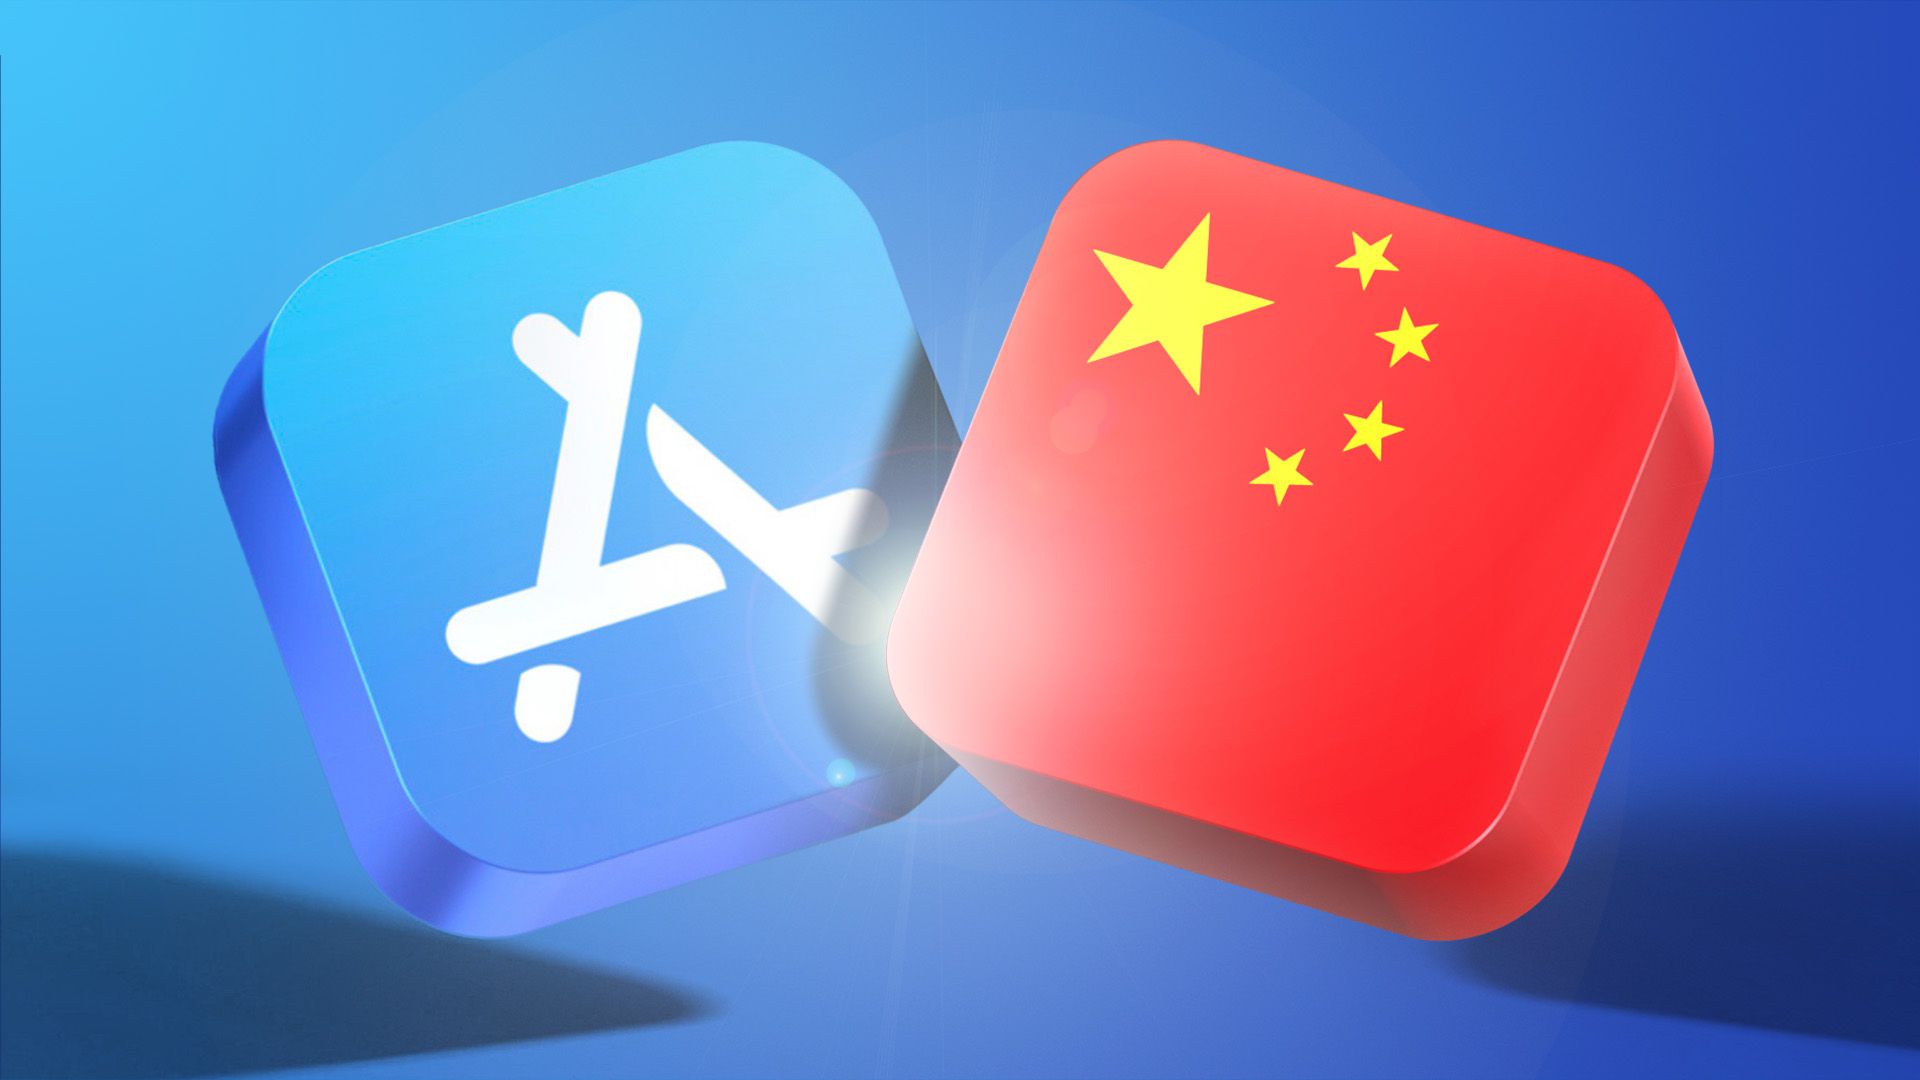 Several App Store Employees Fired in China for Accepting Free Meals and Nightclub Trips From Developers - macrumors.com